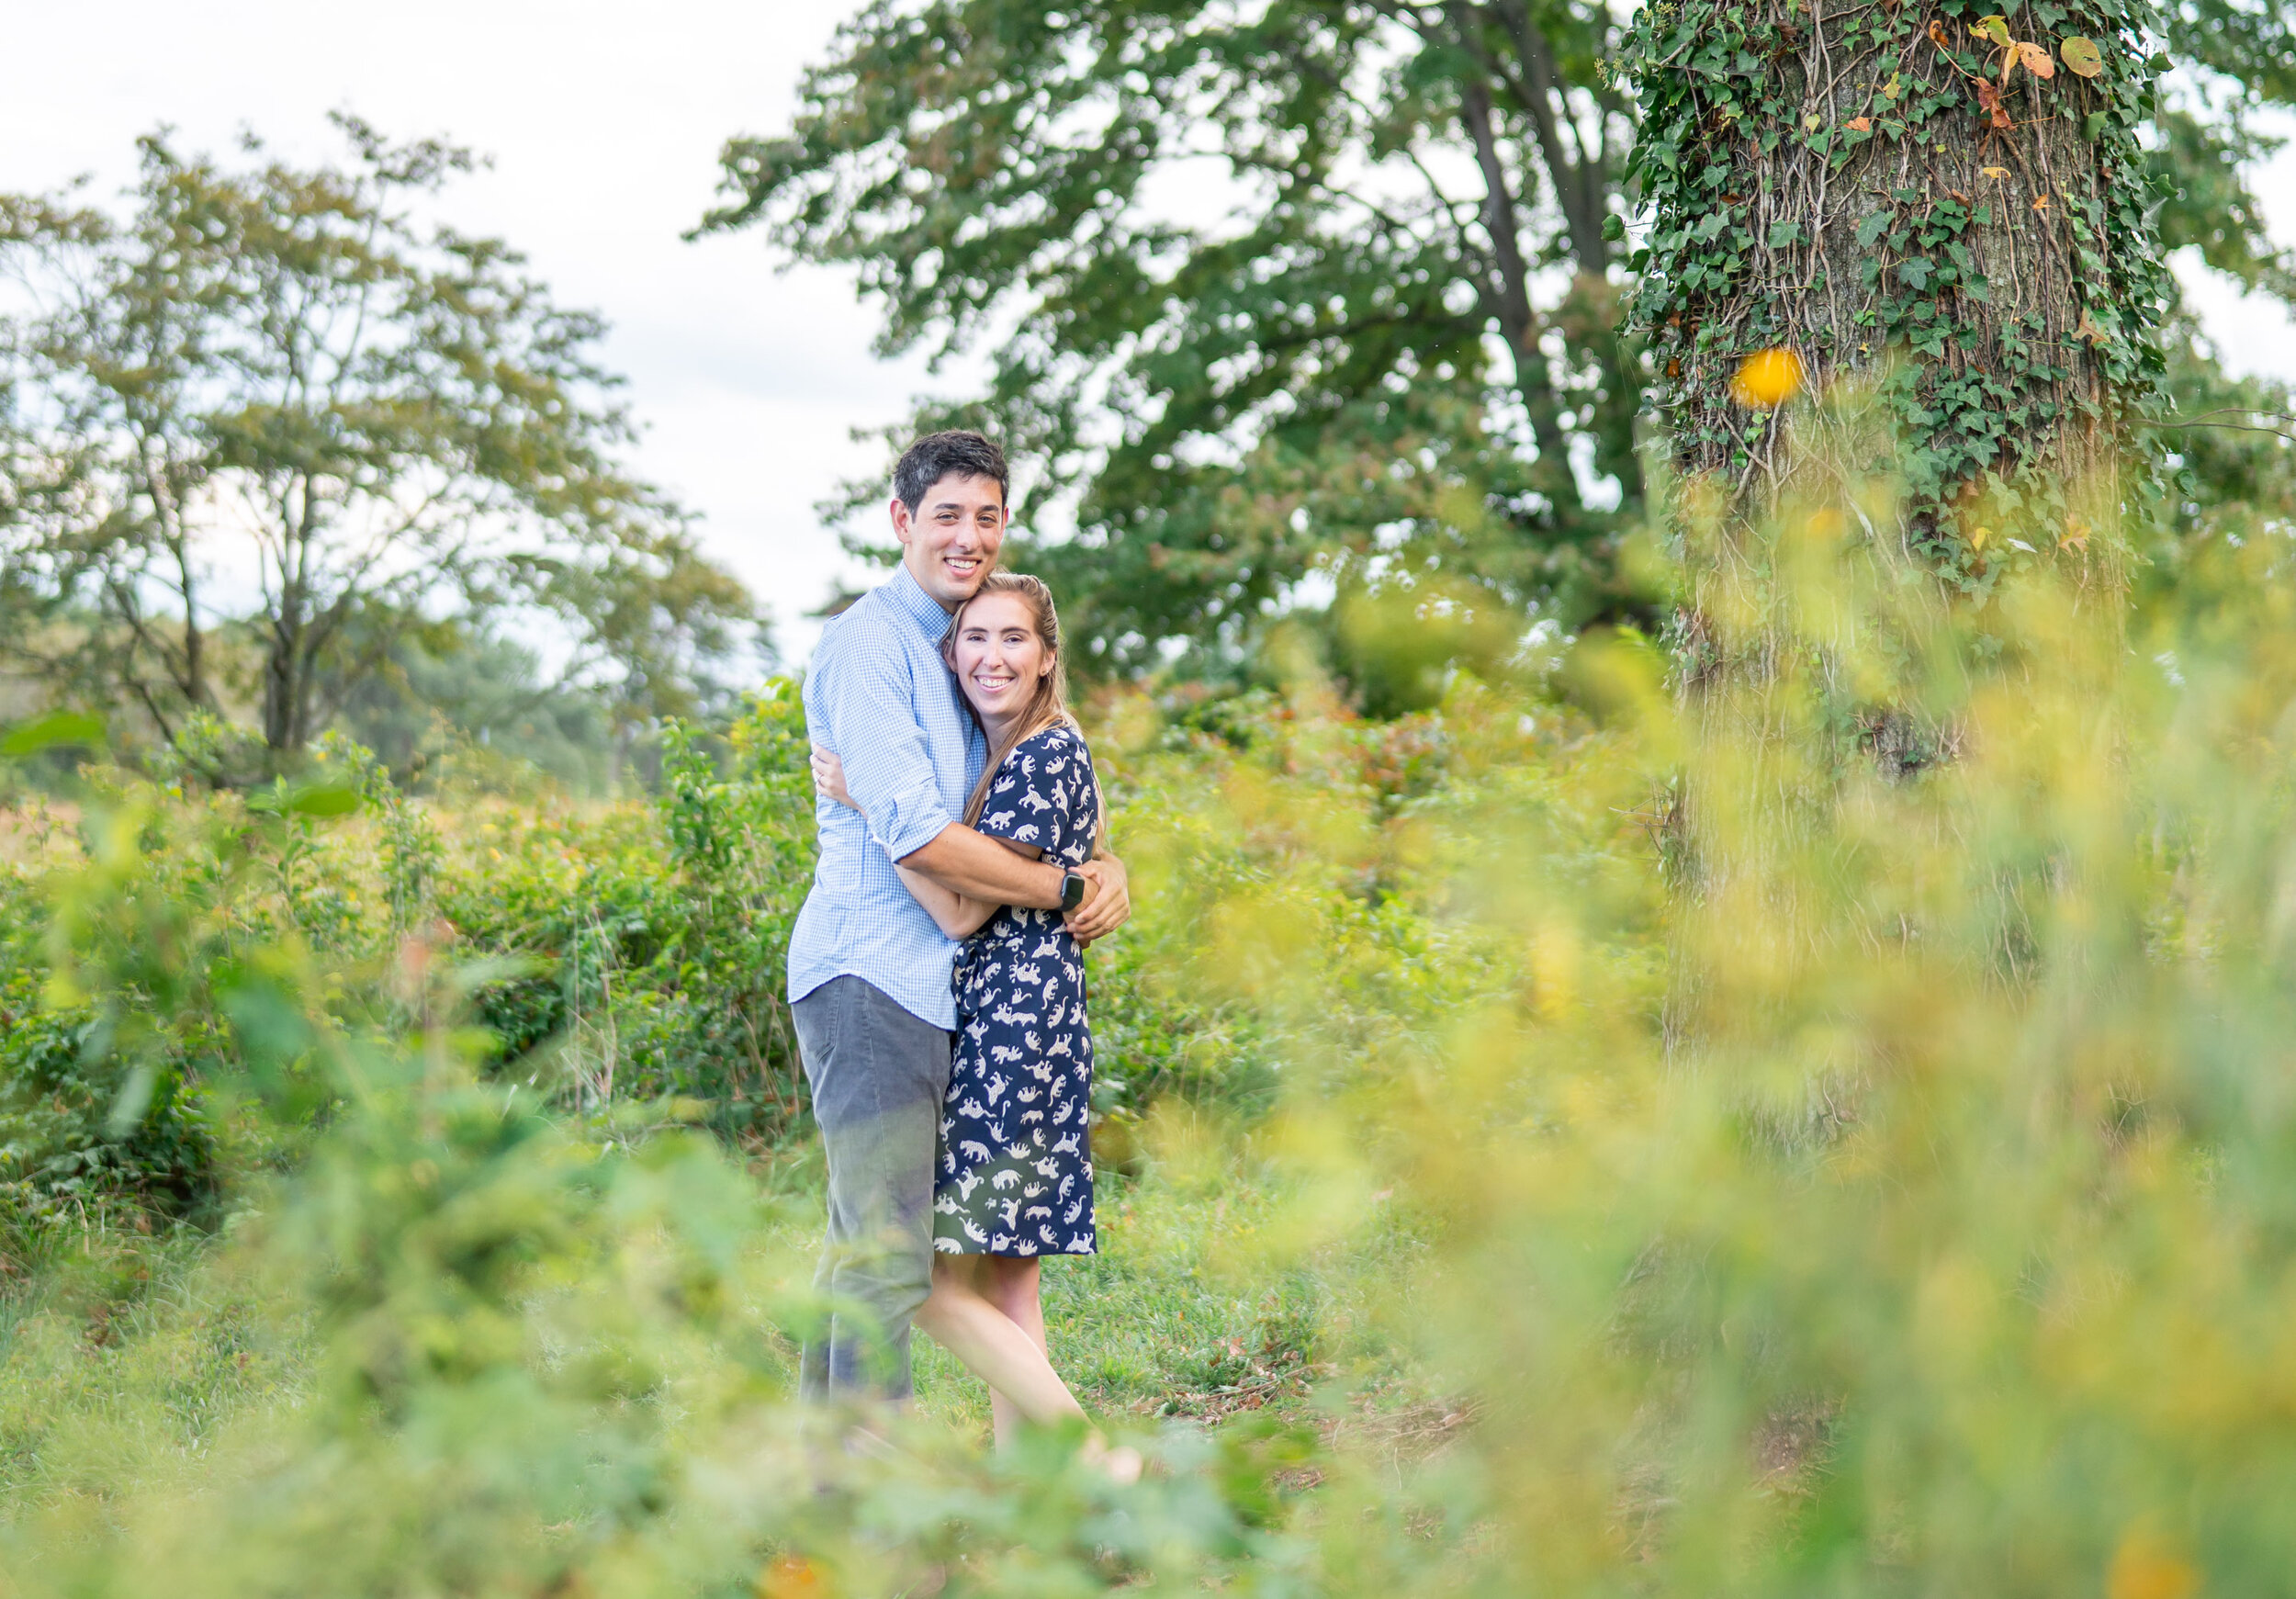 Couple hugging under trees in daisy black eyed susan field